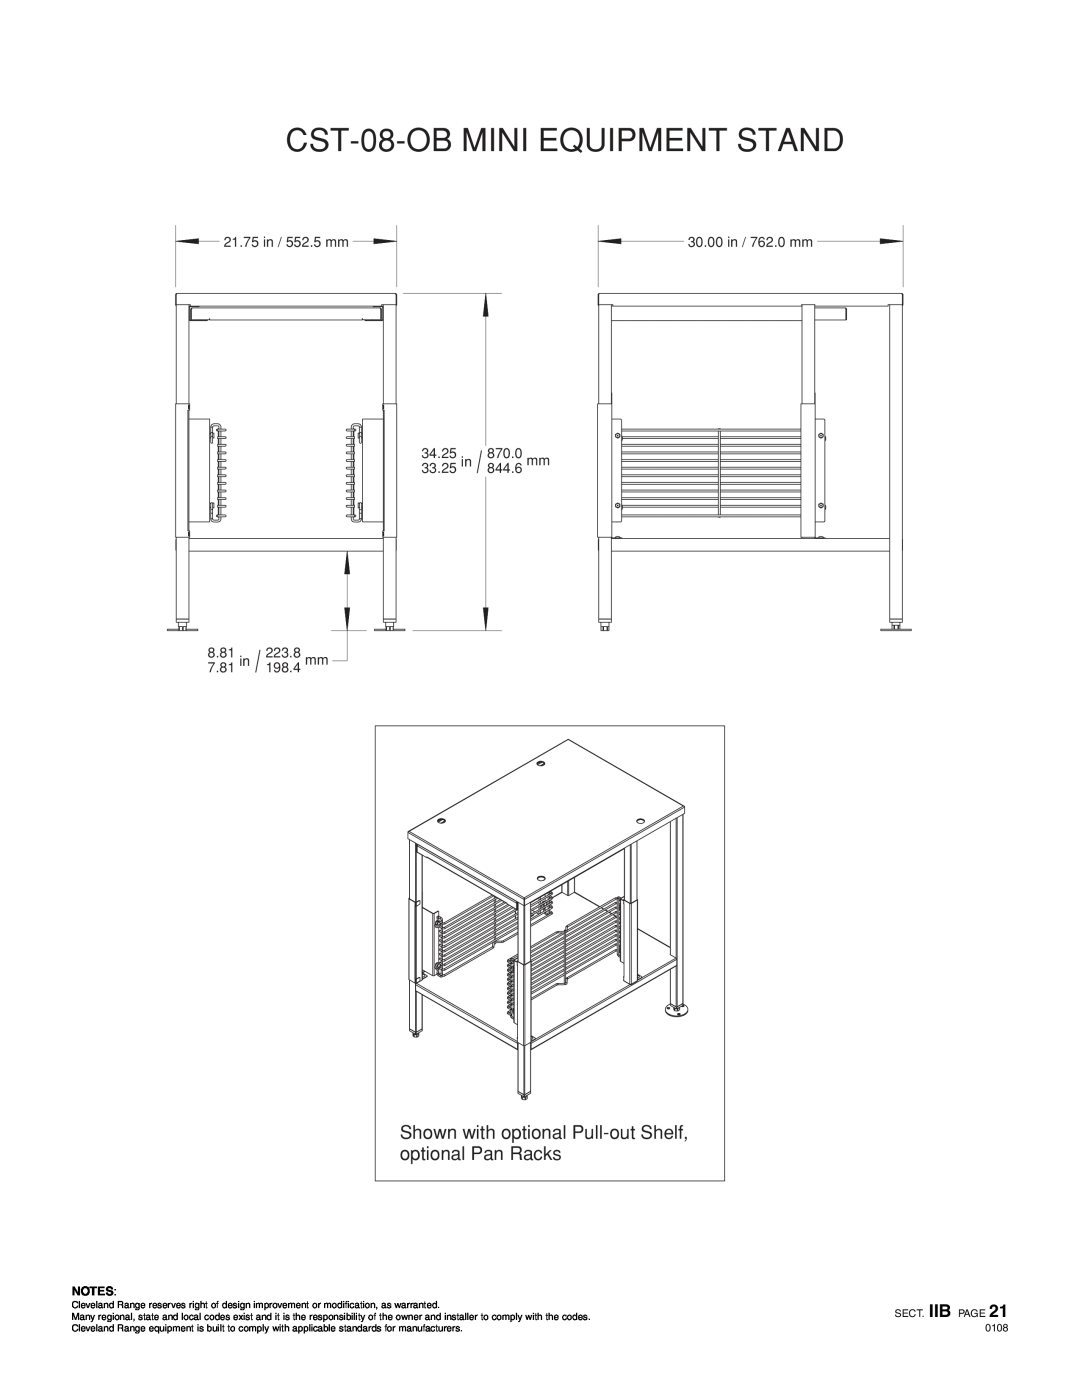 Cleveland Range CST 08-0B CST-08-OBMINI EQUIPMENT STAND, 21.75 in / 552.5 mm, 30.00 in / 762.0 mm, Sect. Iib Page 